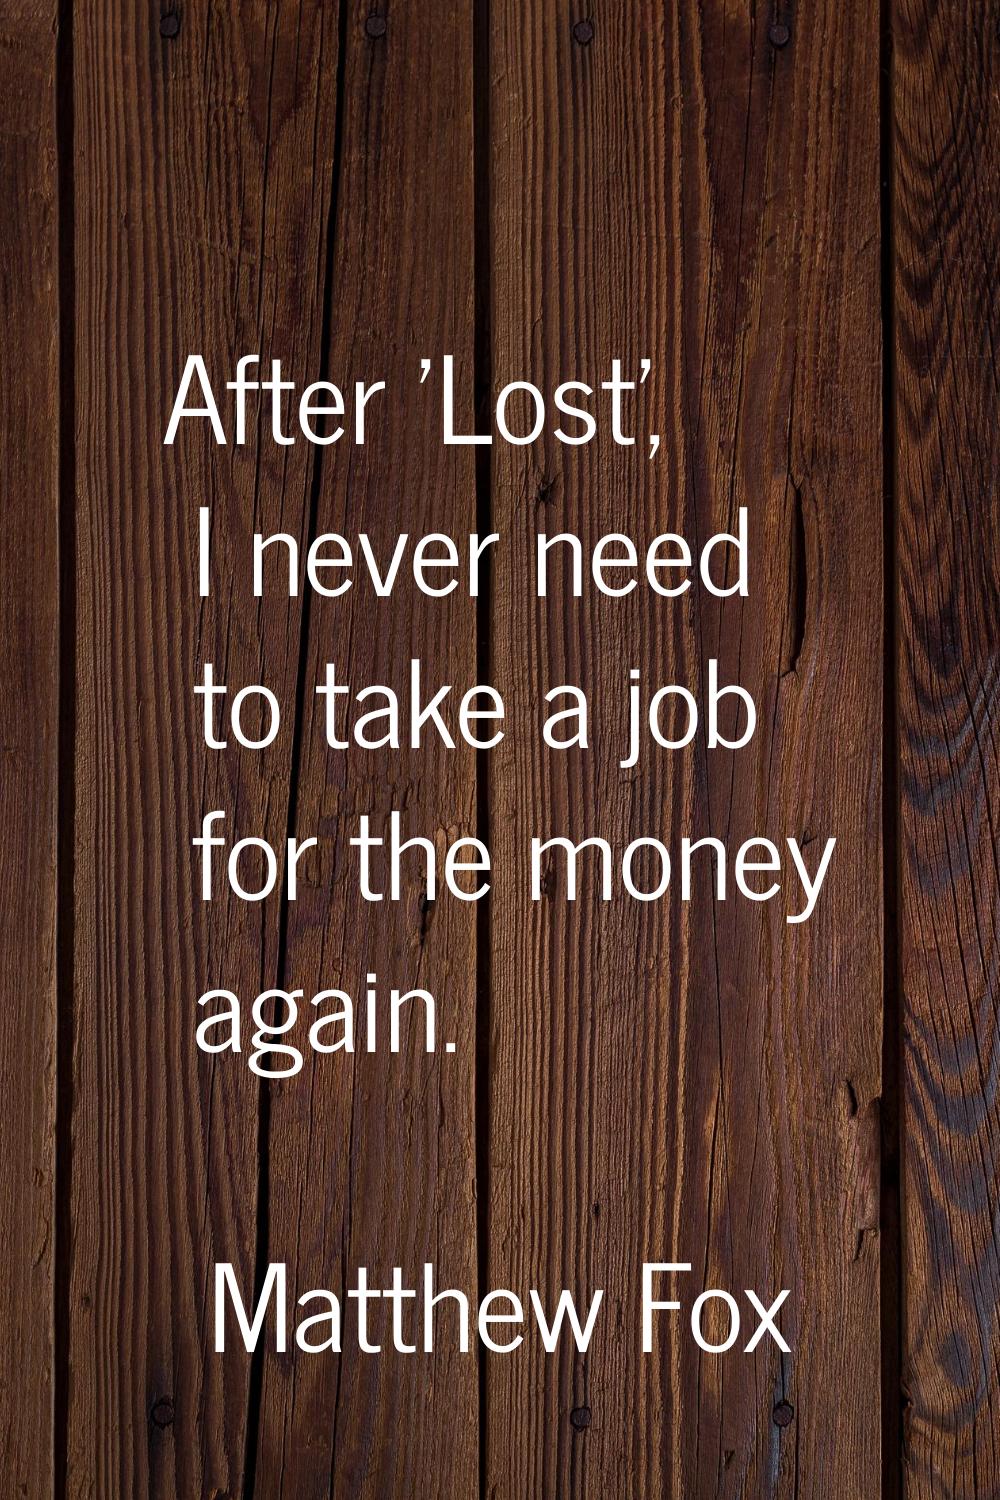 After 'Lost', I never need to take a job for the money again.